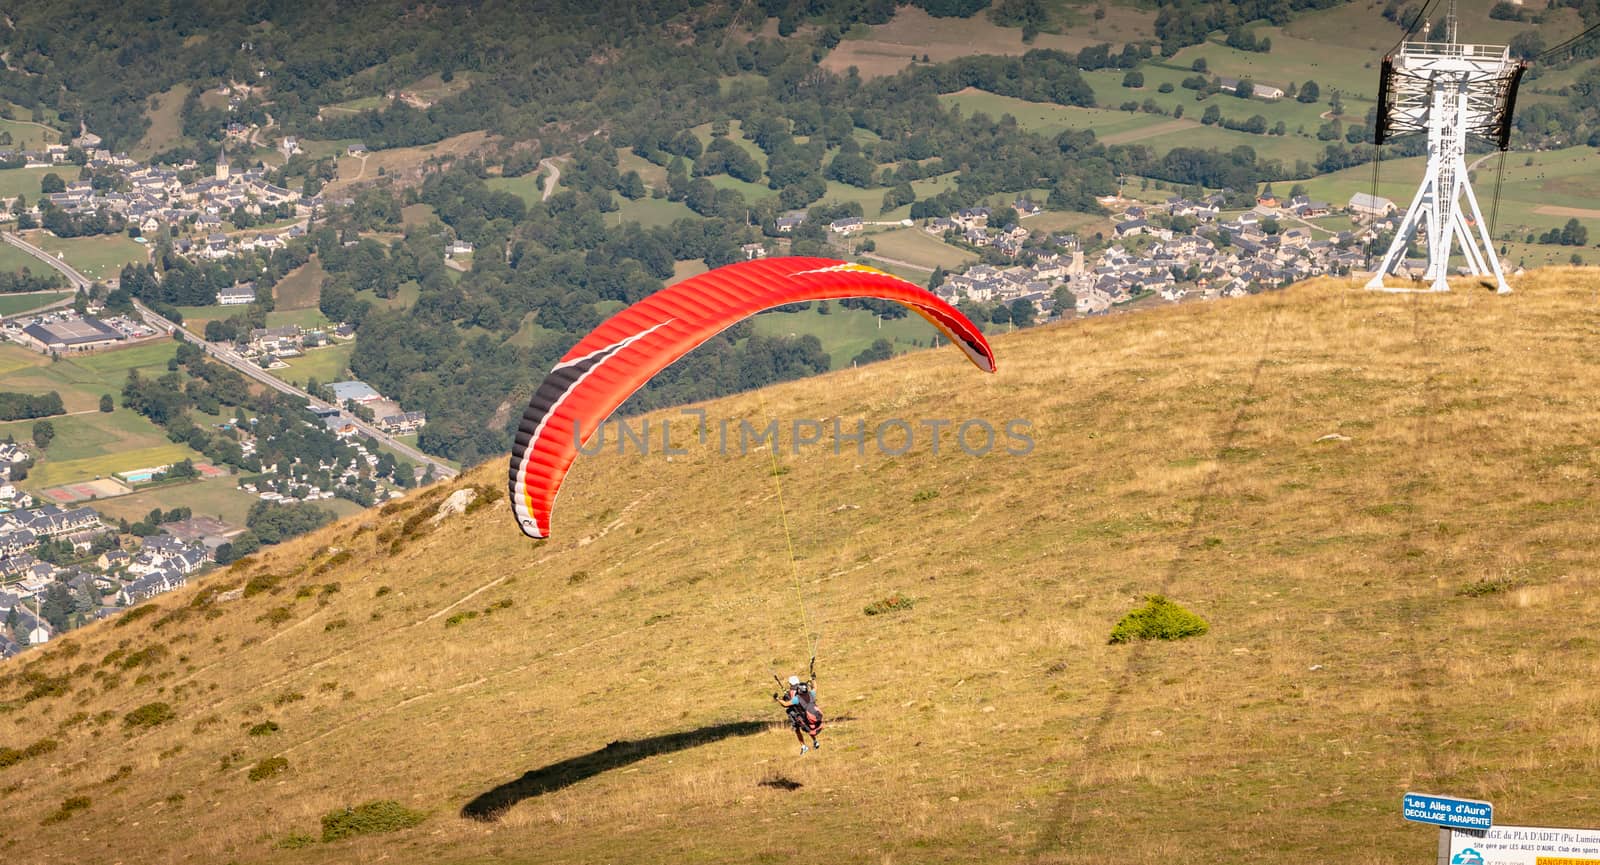 Saint Lary Soulan, France - August 20, 2018: takeoff of a paraglider from the top of the mountain, at 1700 meters altitude to fly over the valley on a summer day